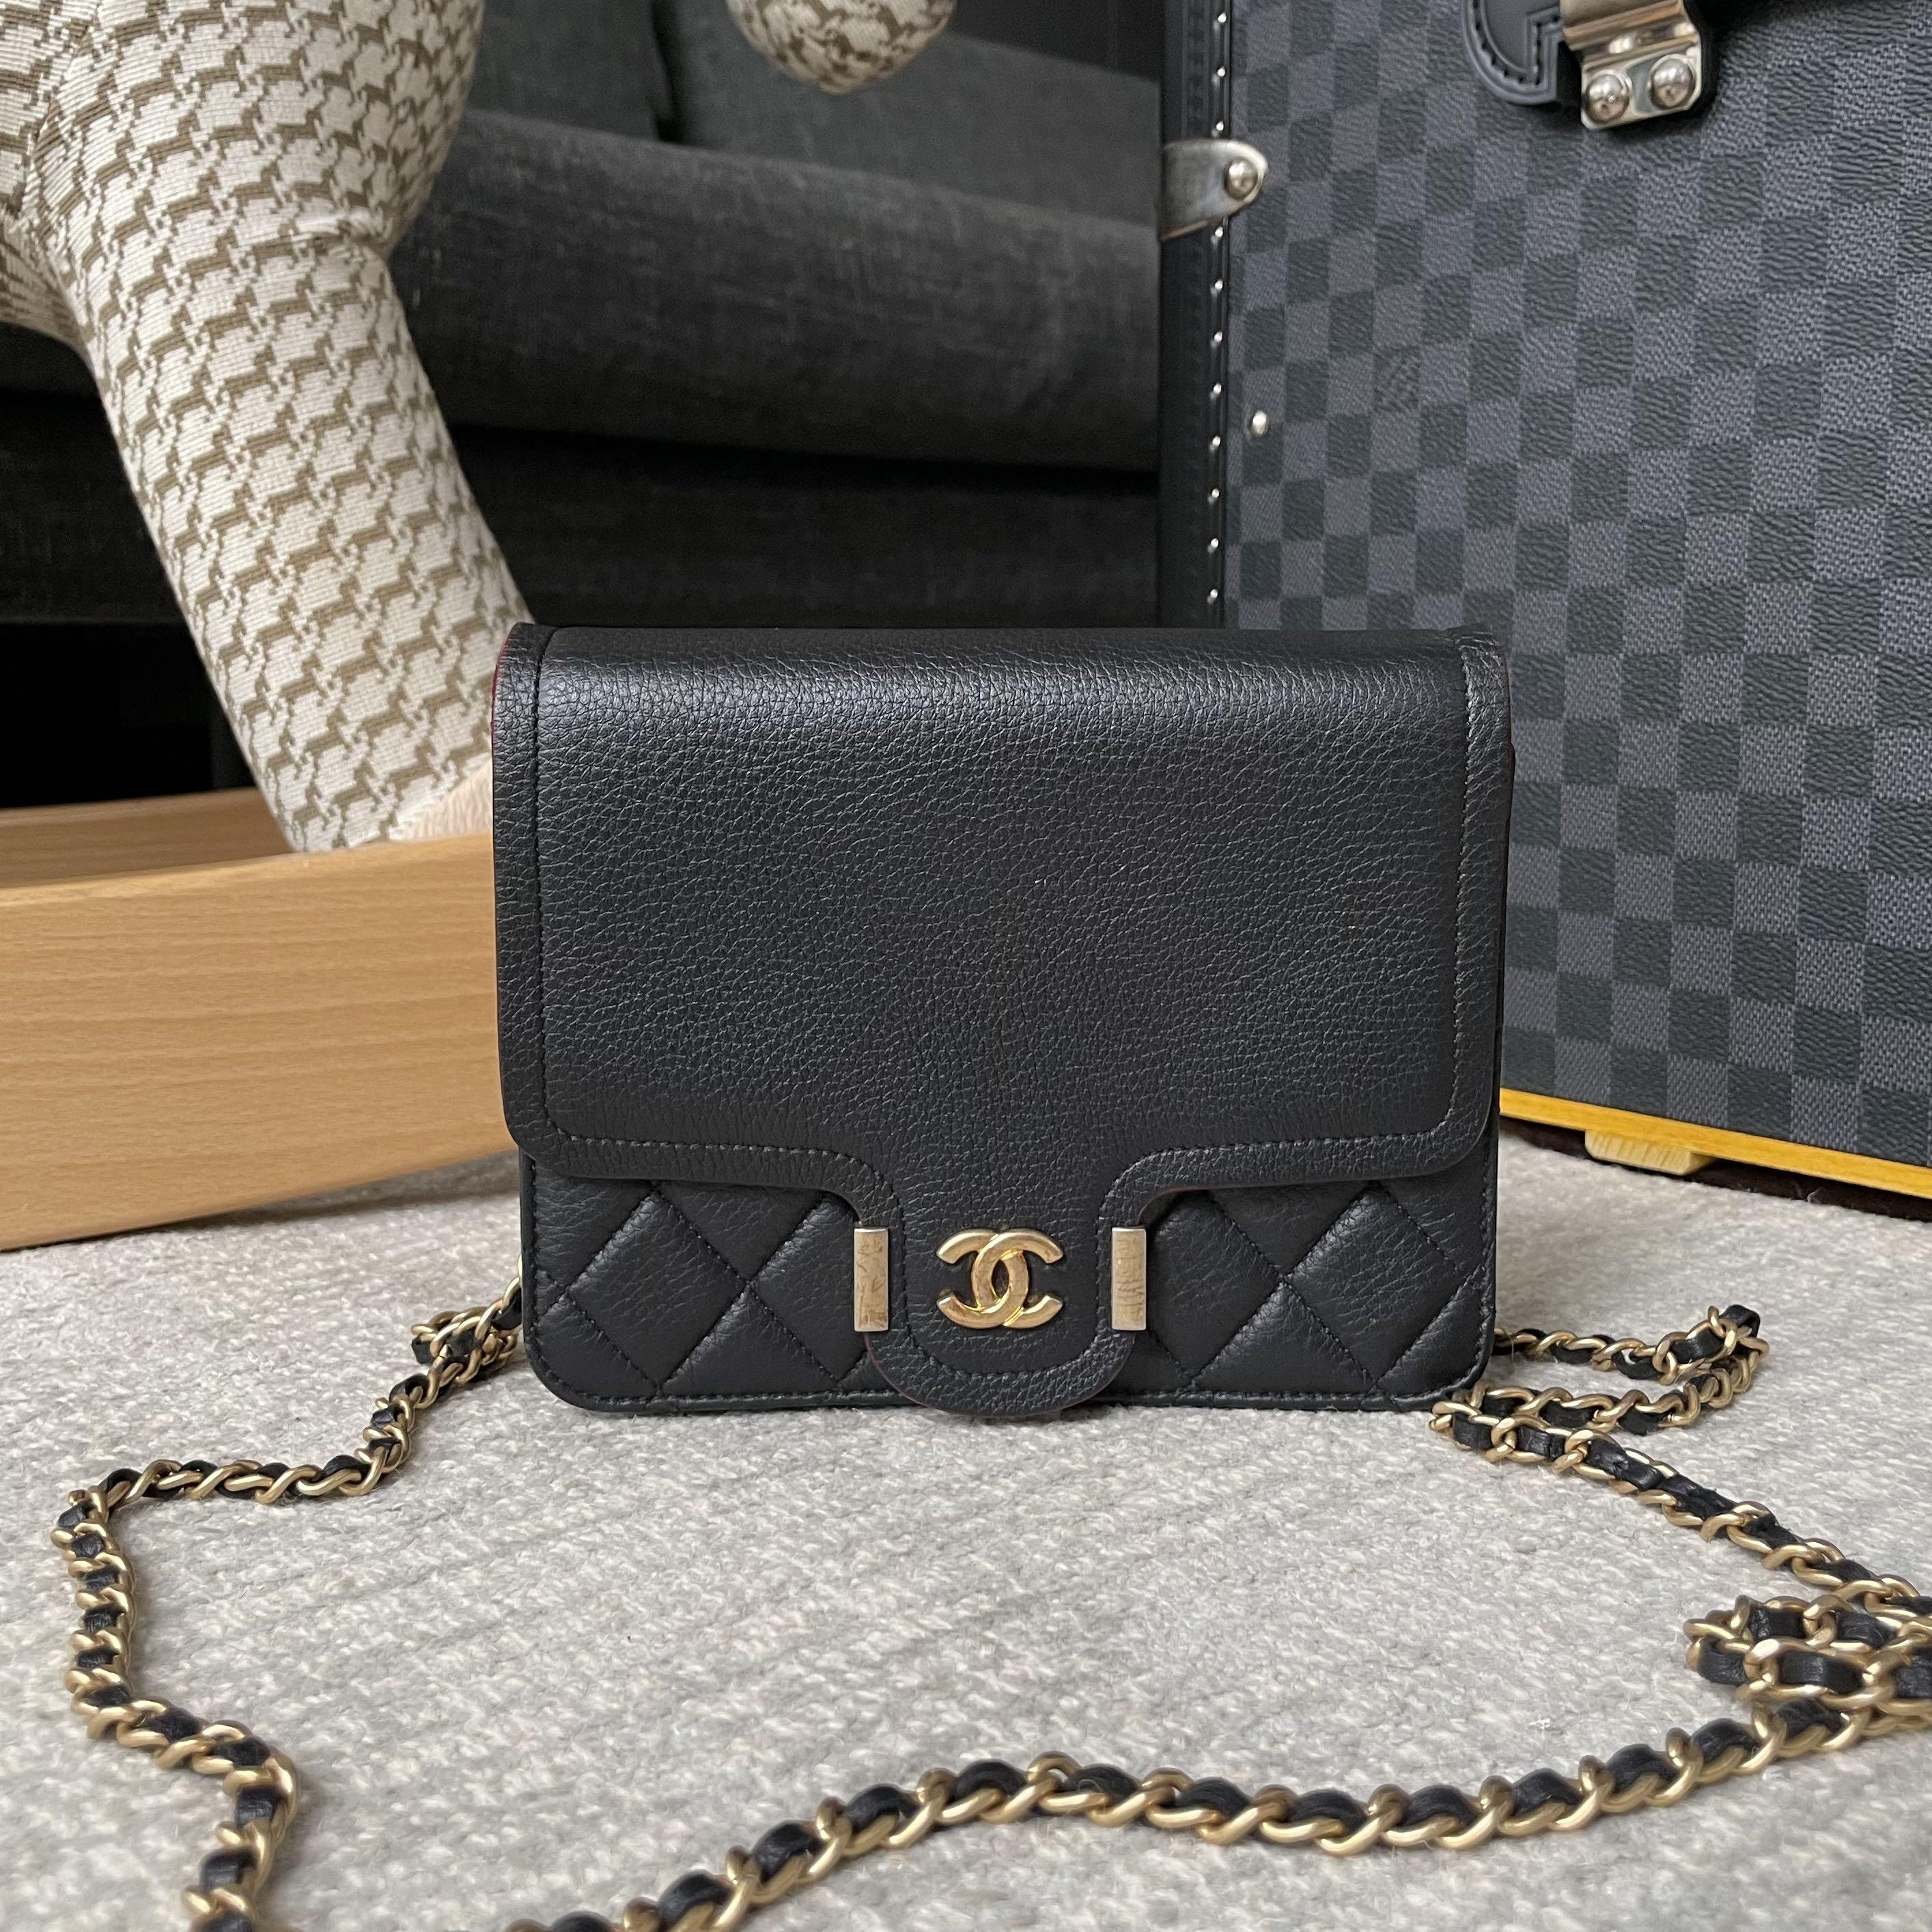 Chanel Cruise 2018 Bag Collection Features Pleated Handbags  Spotted  Fashion